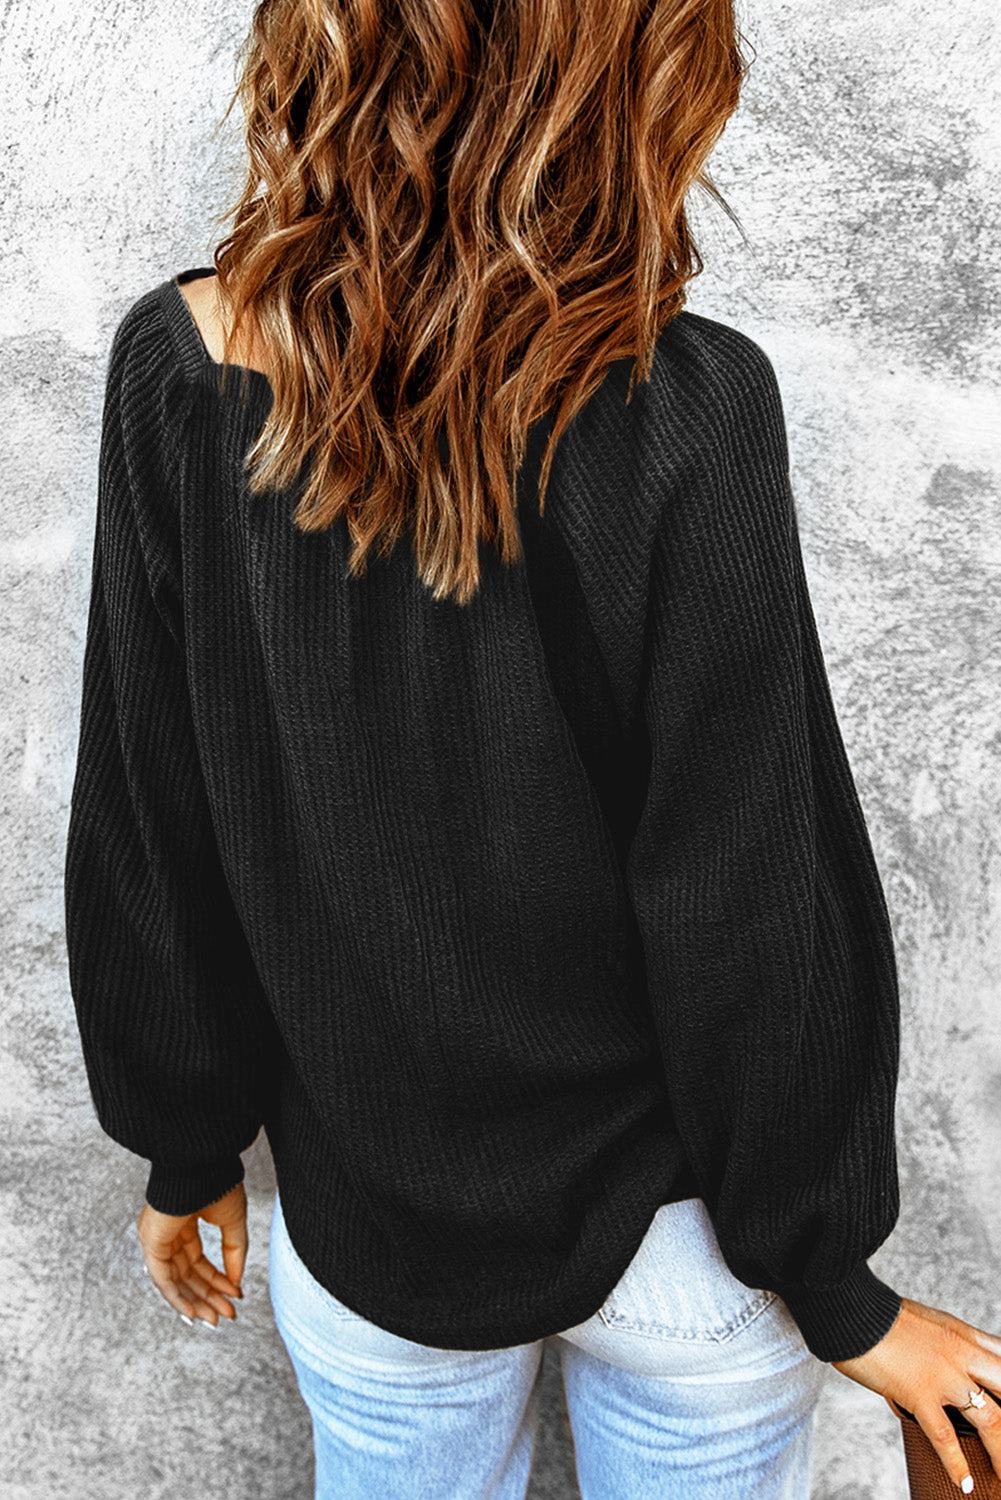 Black Scoop Neck Puff Sleeve Waffle Knit Top Long Sleeve Tops JT's Designer Fashion